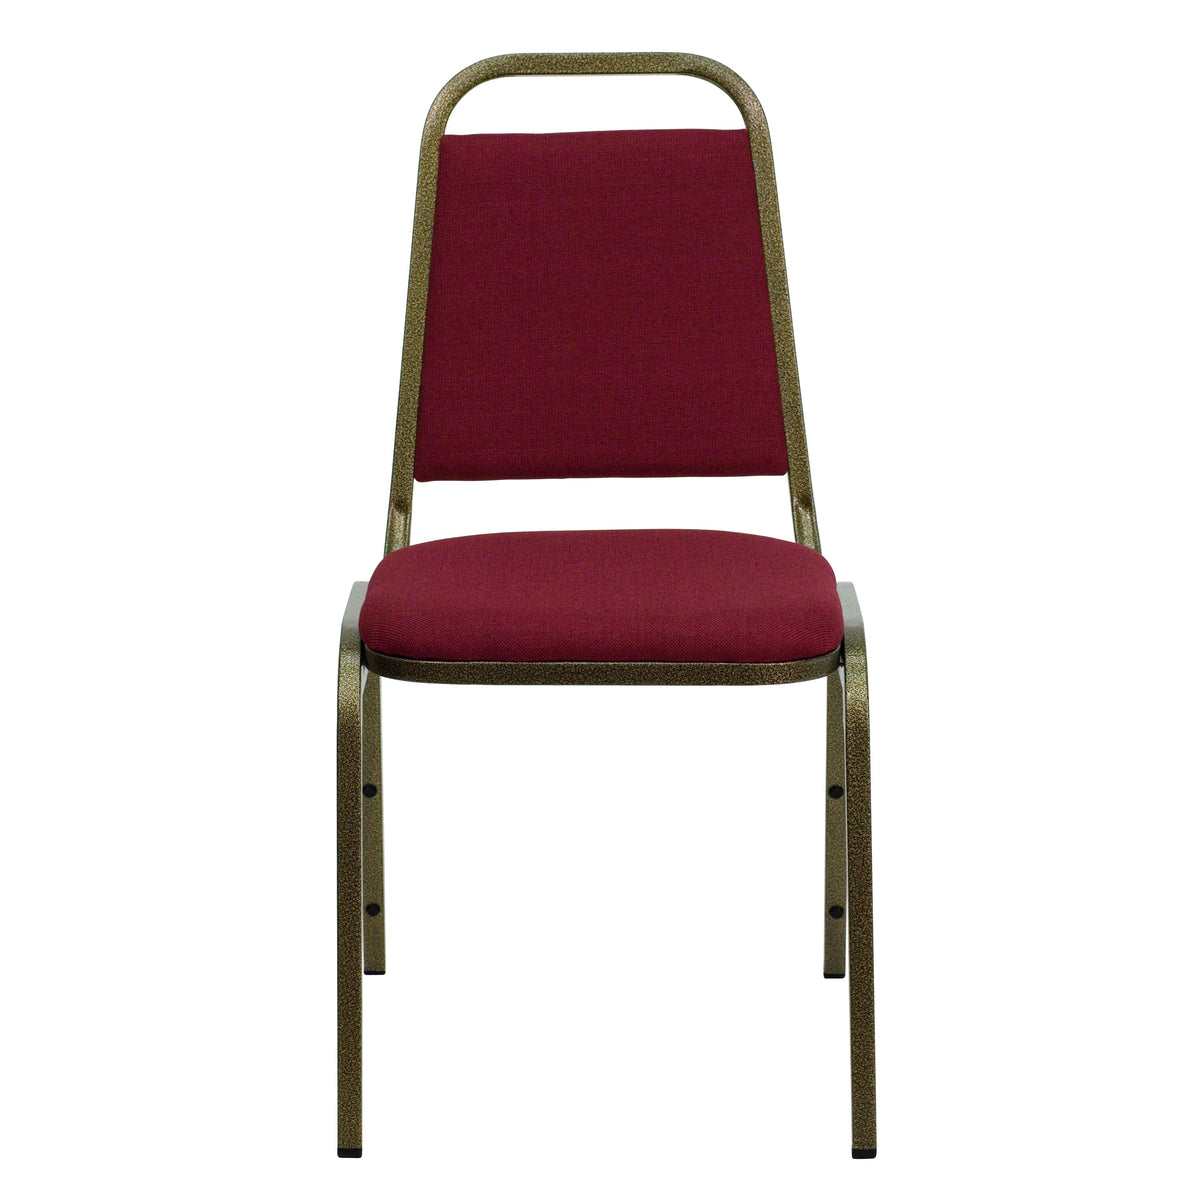 Burgundy Fabric/Gold Vein Frame |#| Trapezoidal Back Stacking Banquet Chair in Burgundy Fabric - Gold Vein Frame